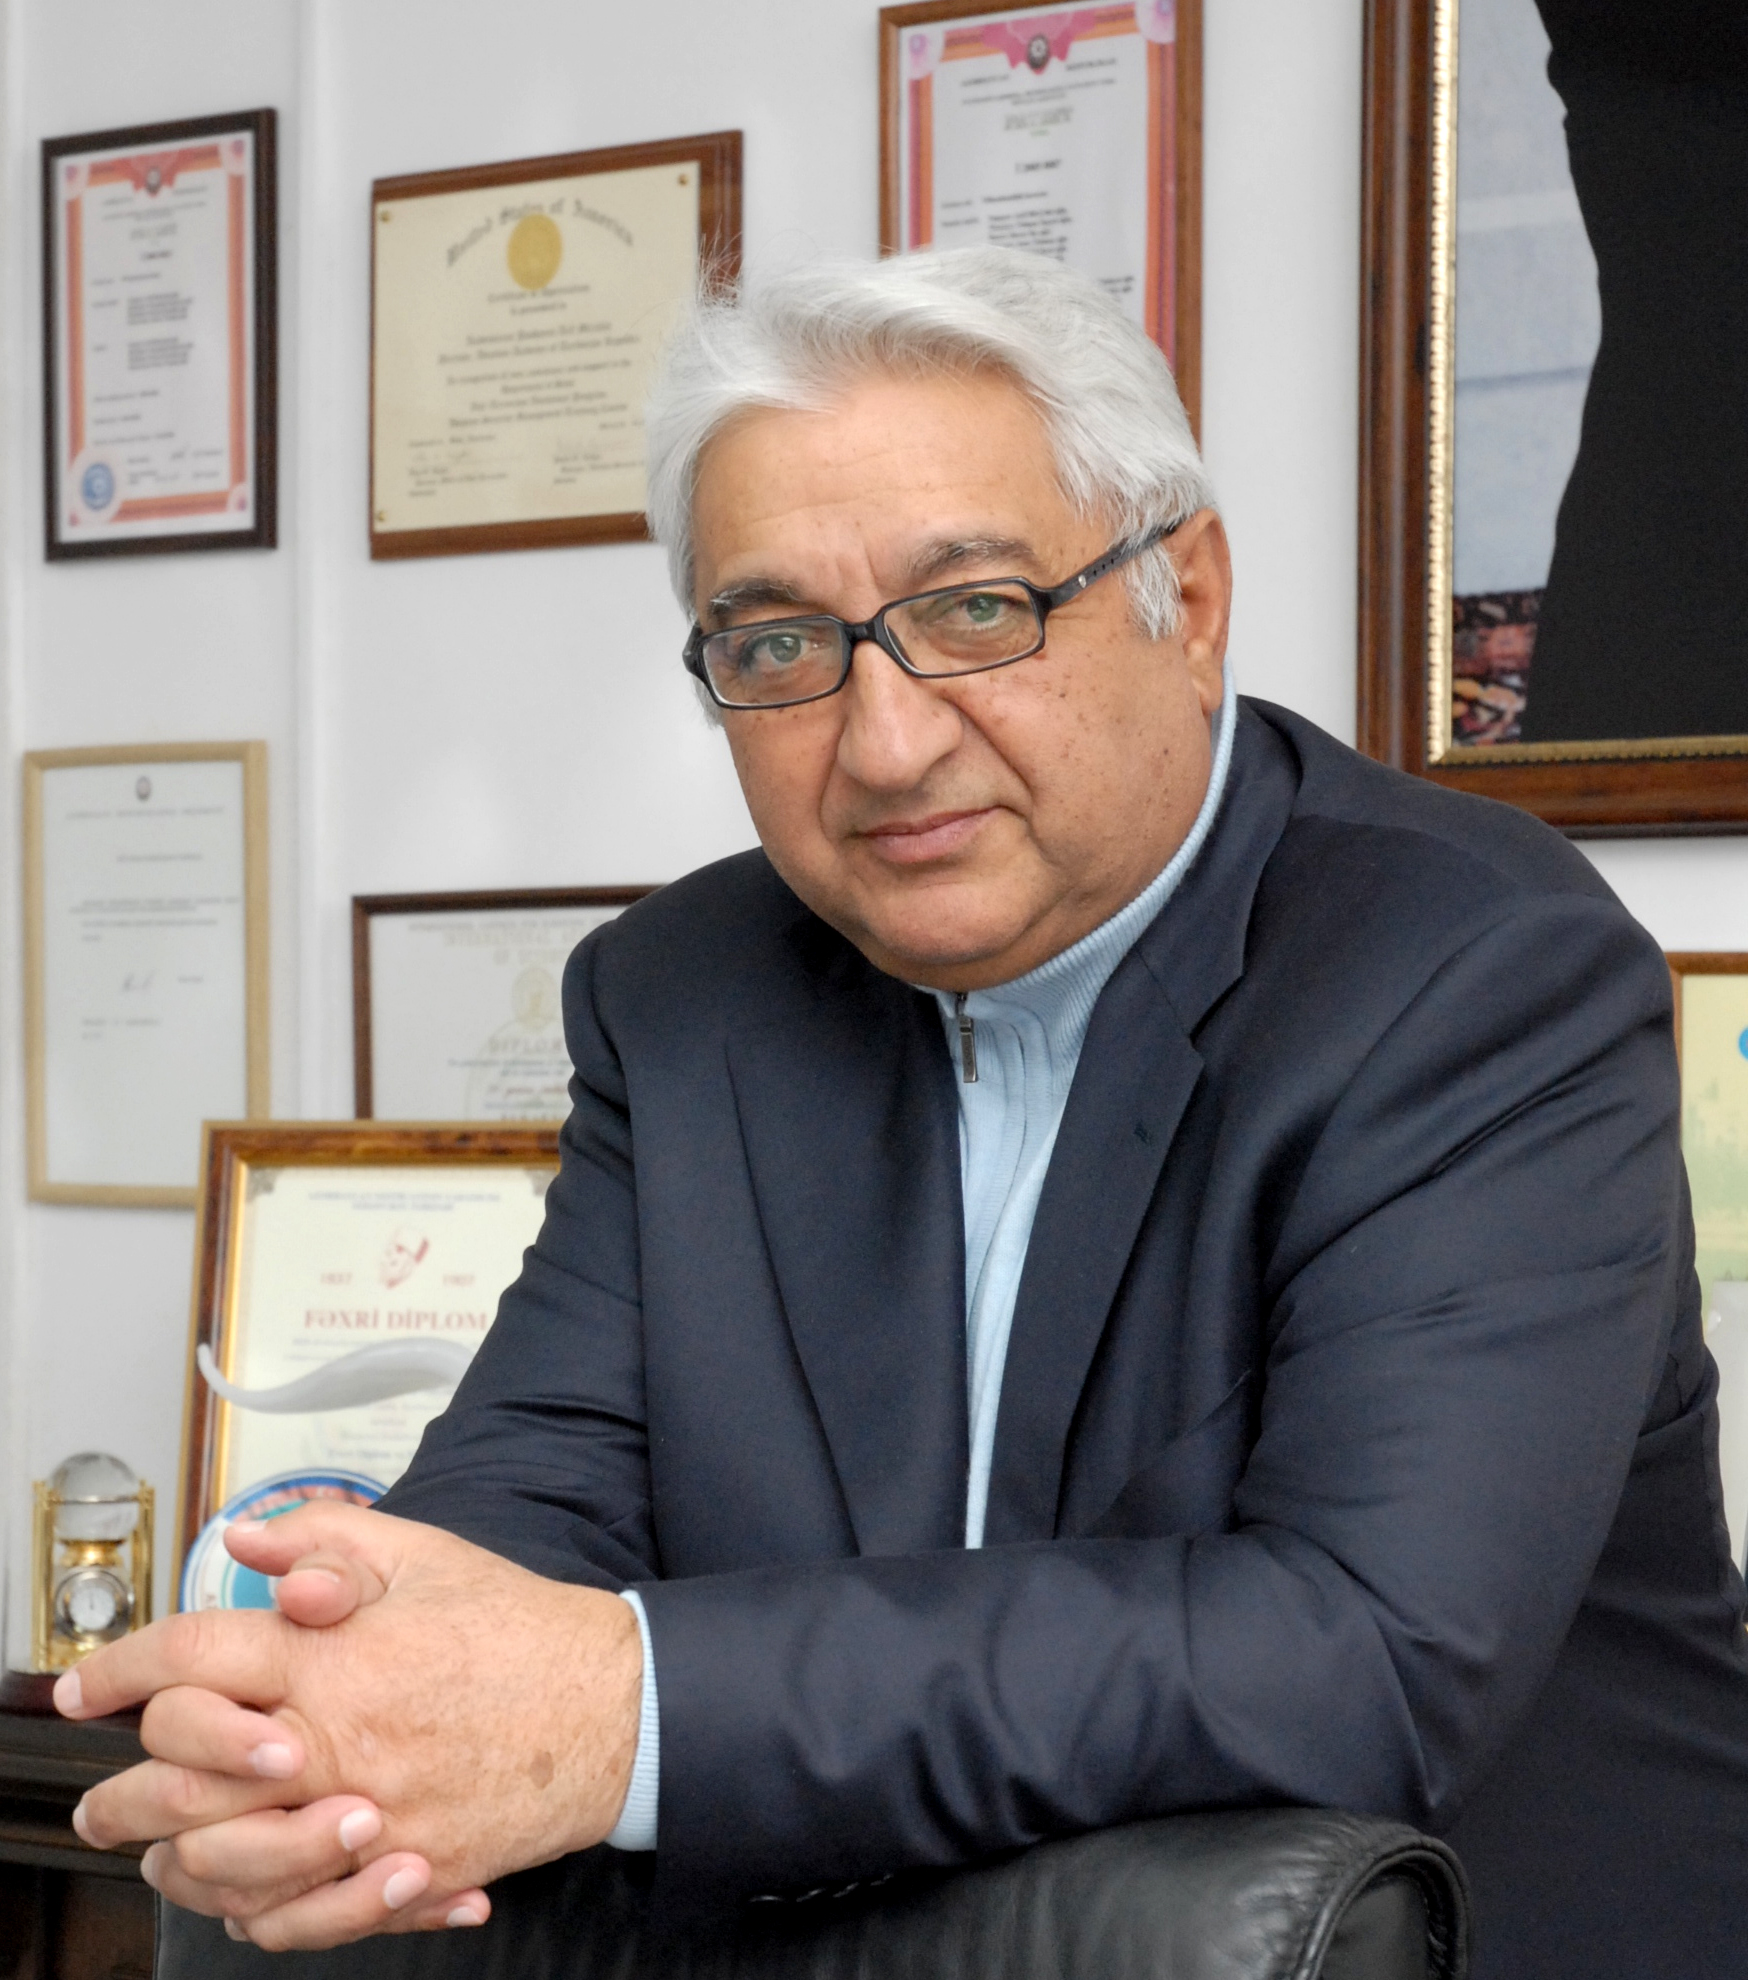 Academician Arif Pashayev awarded by Int’l Academy of Engineering